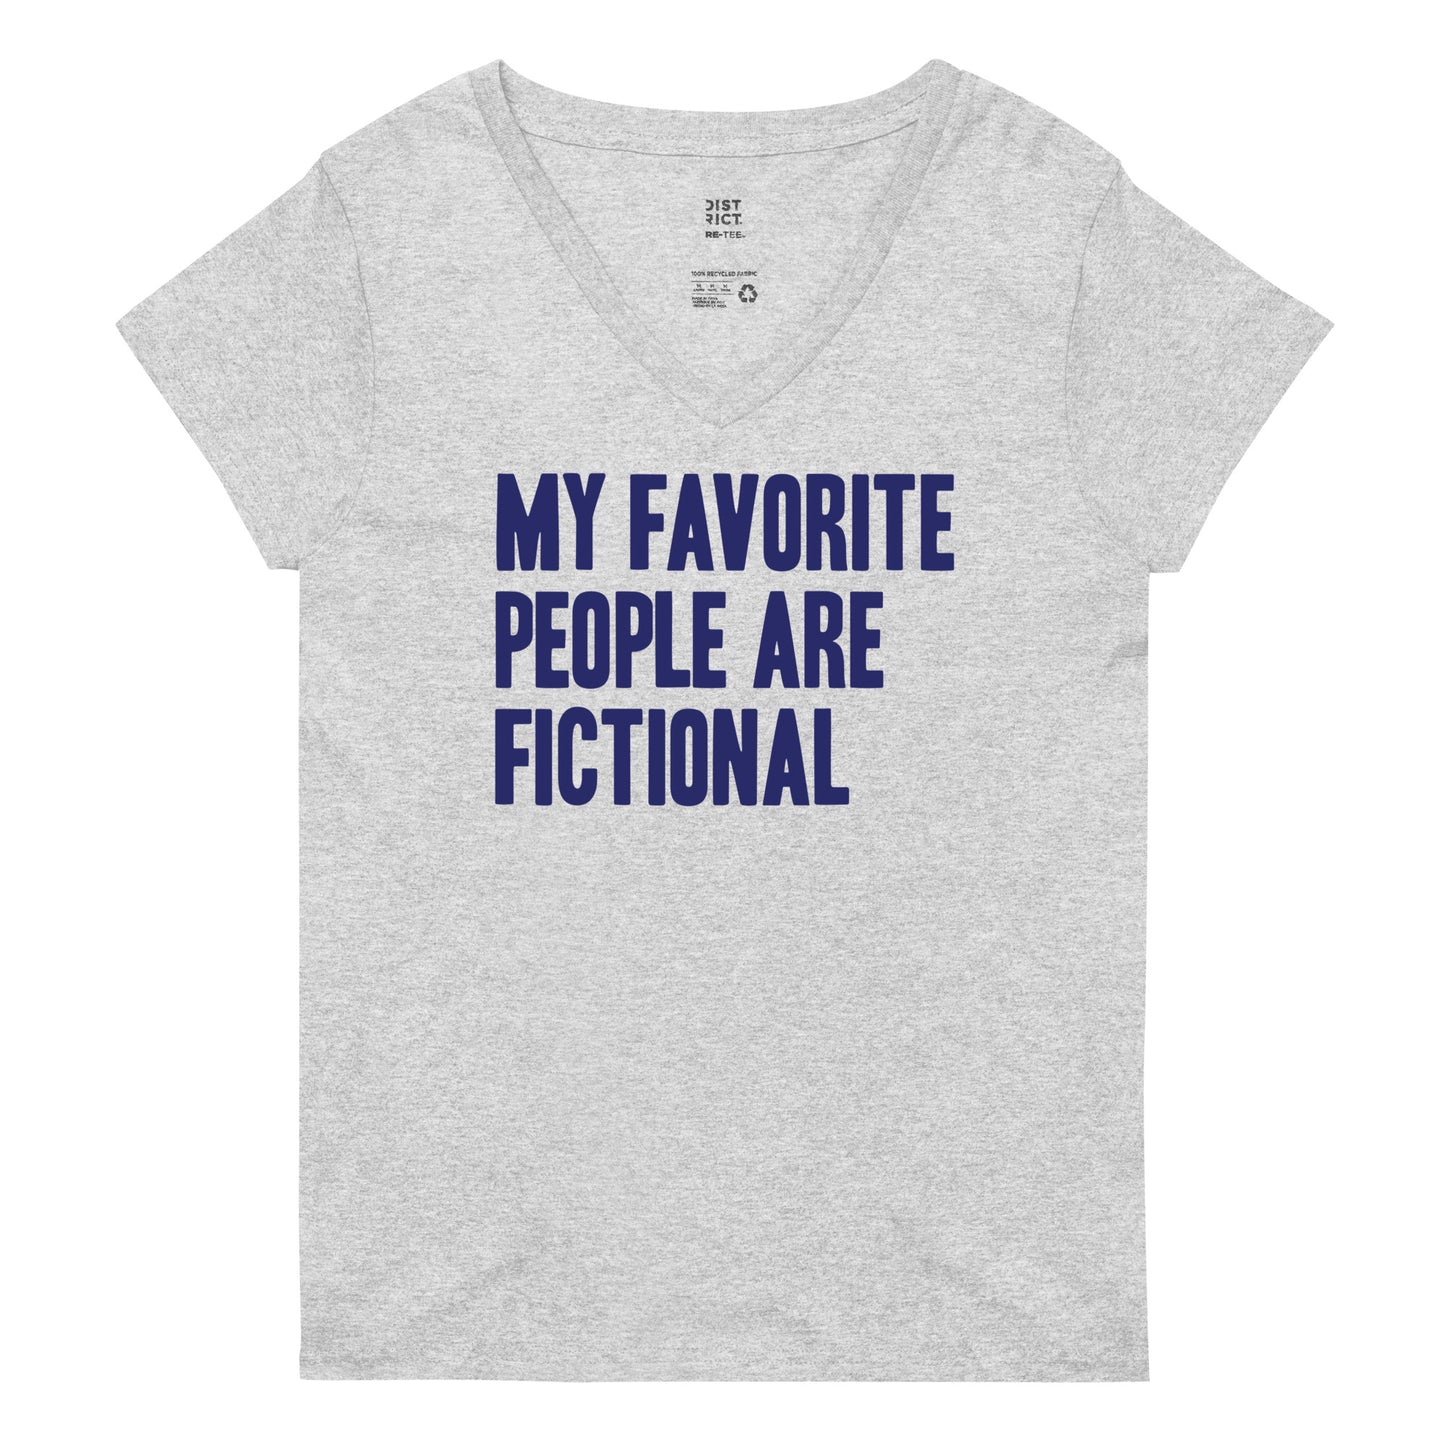 My Favorite People Are Fictional Women's V-Neck Tee